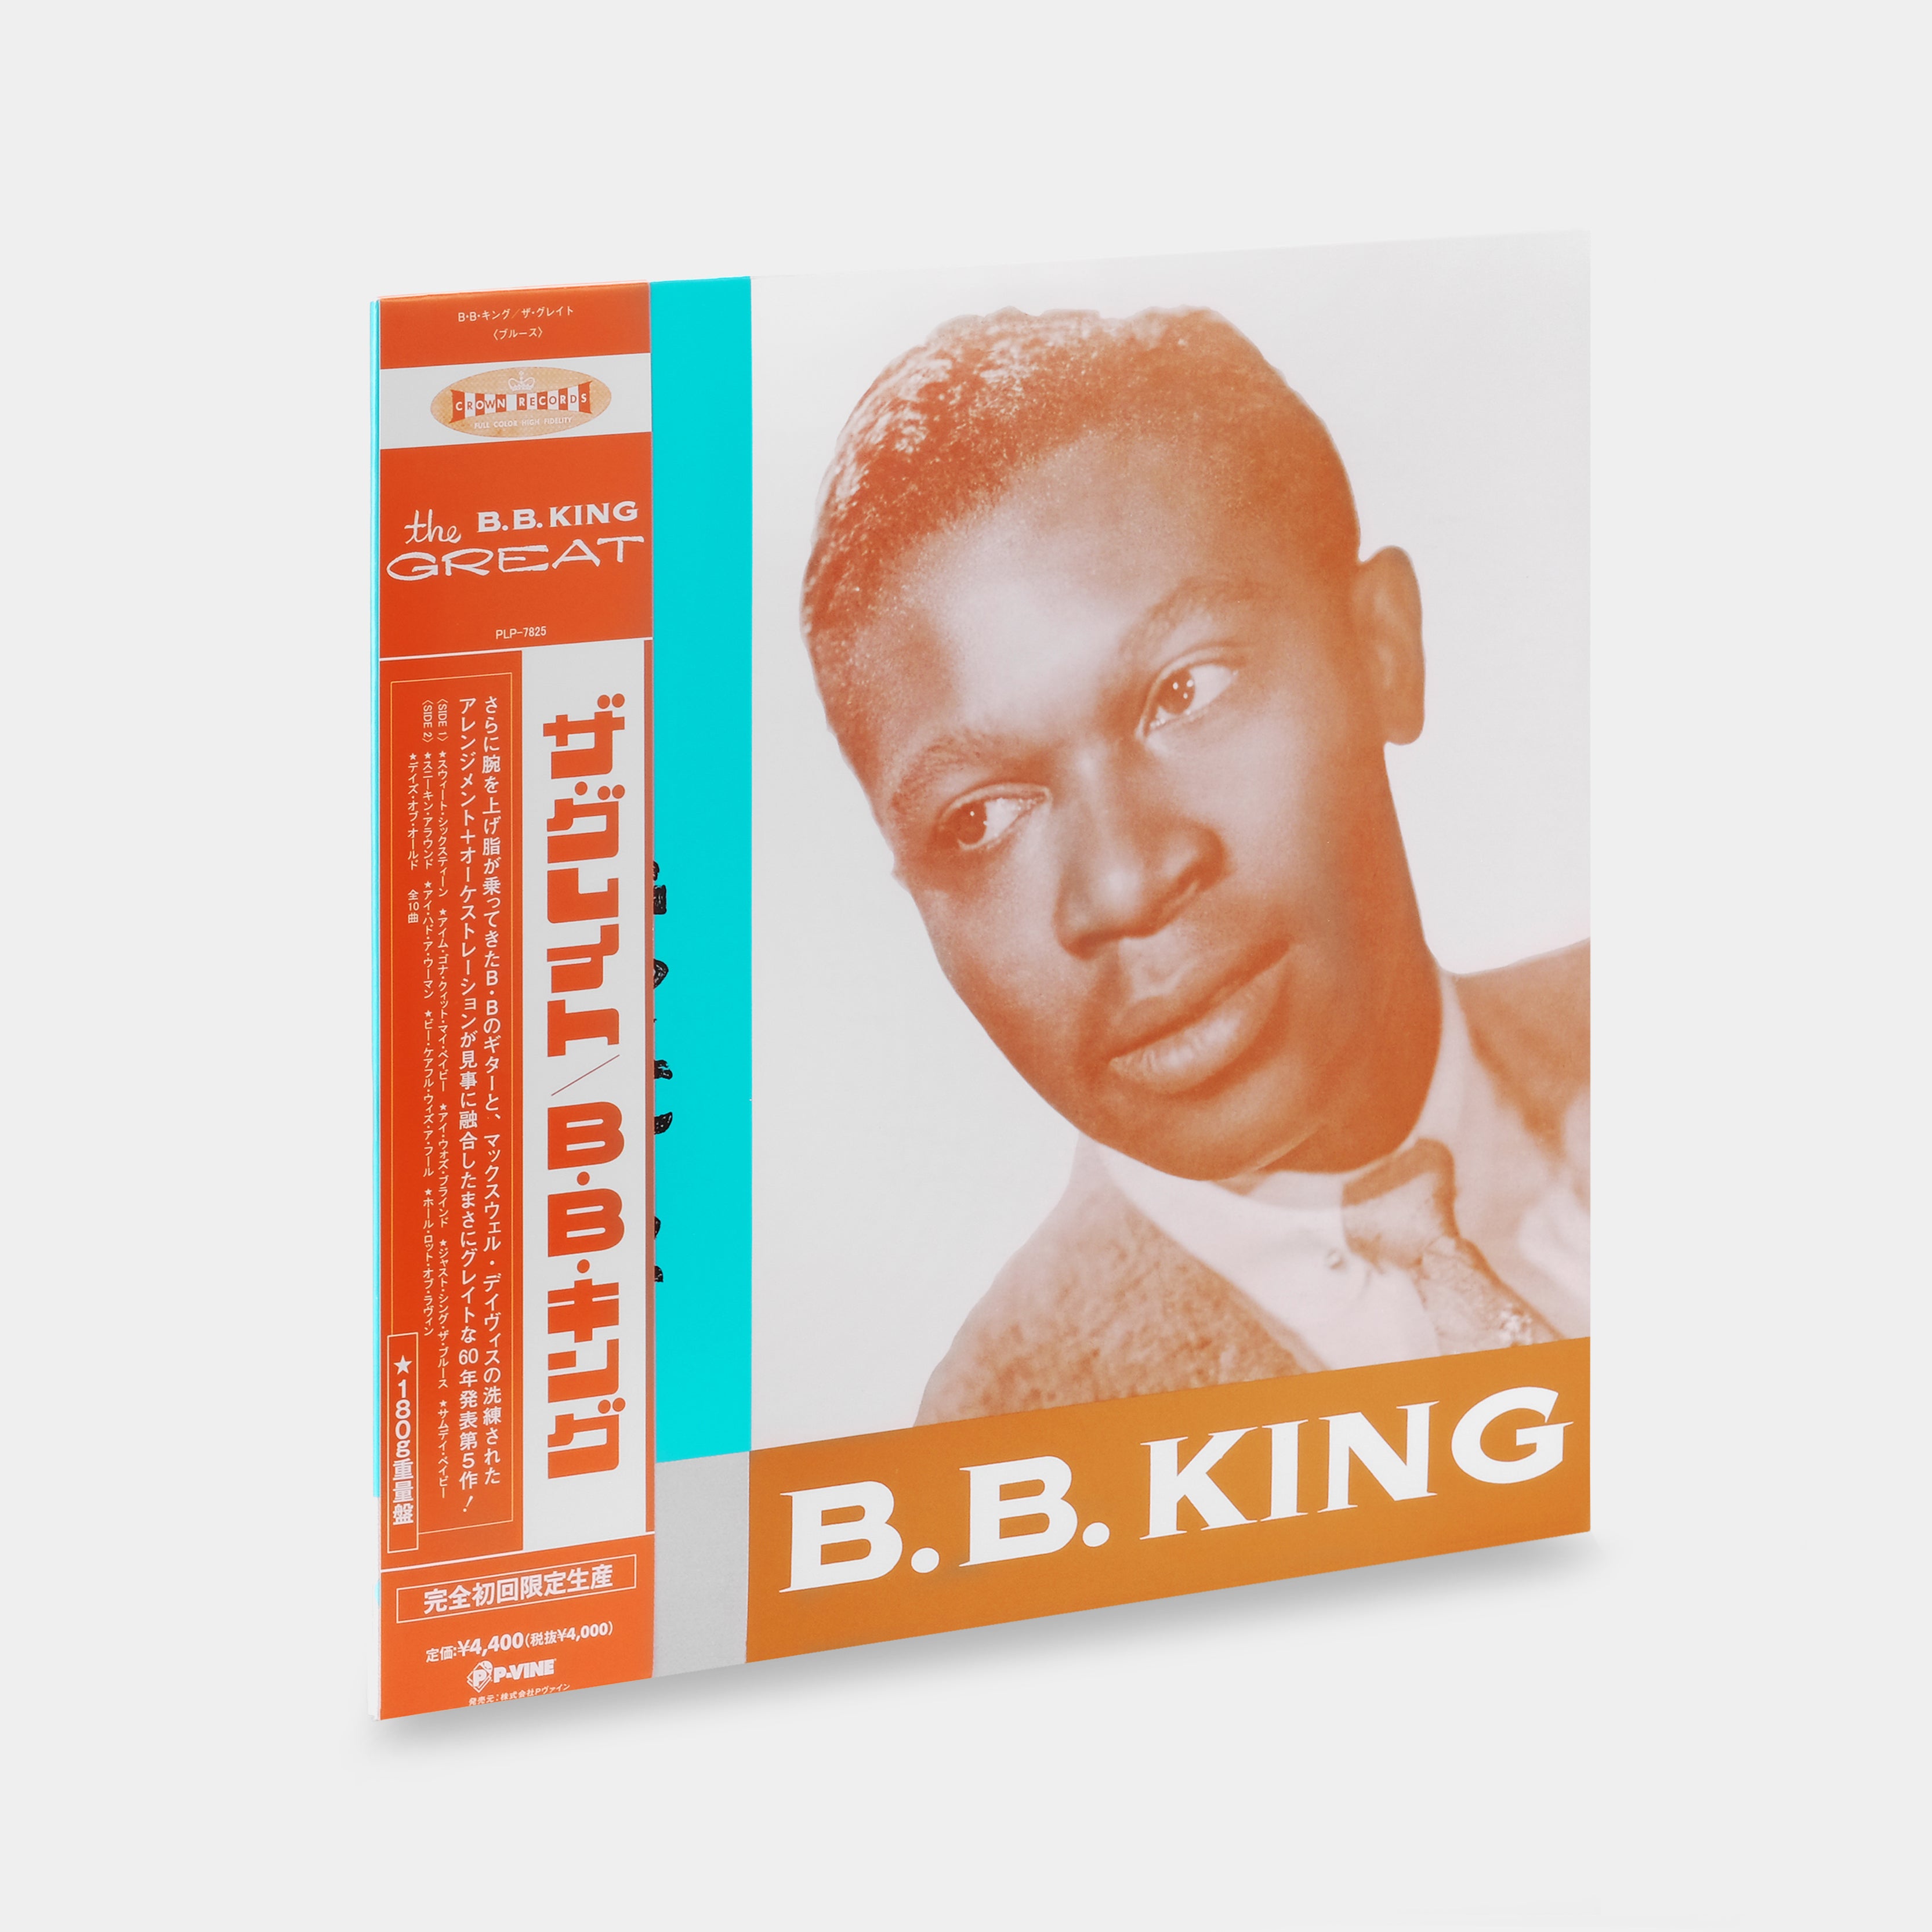 B.B. King And His Orchestra - The Great B.B. King Limited Edition LP Vinyl Record